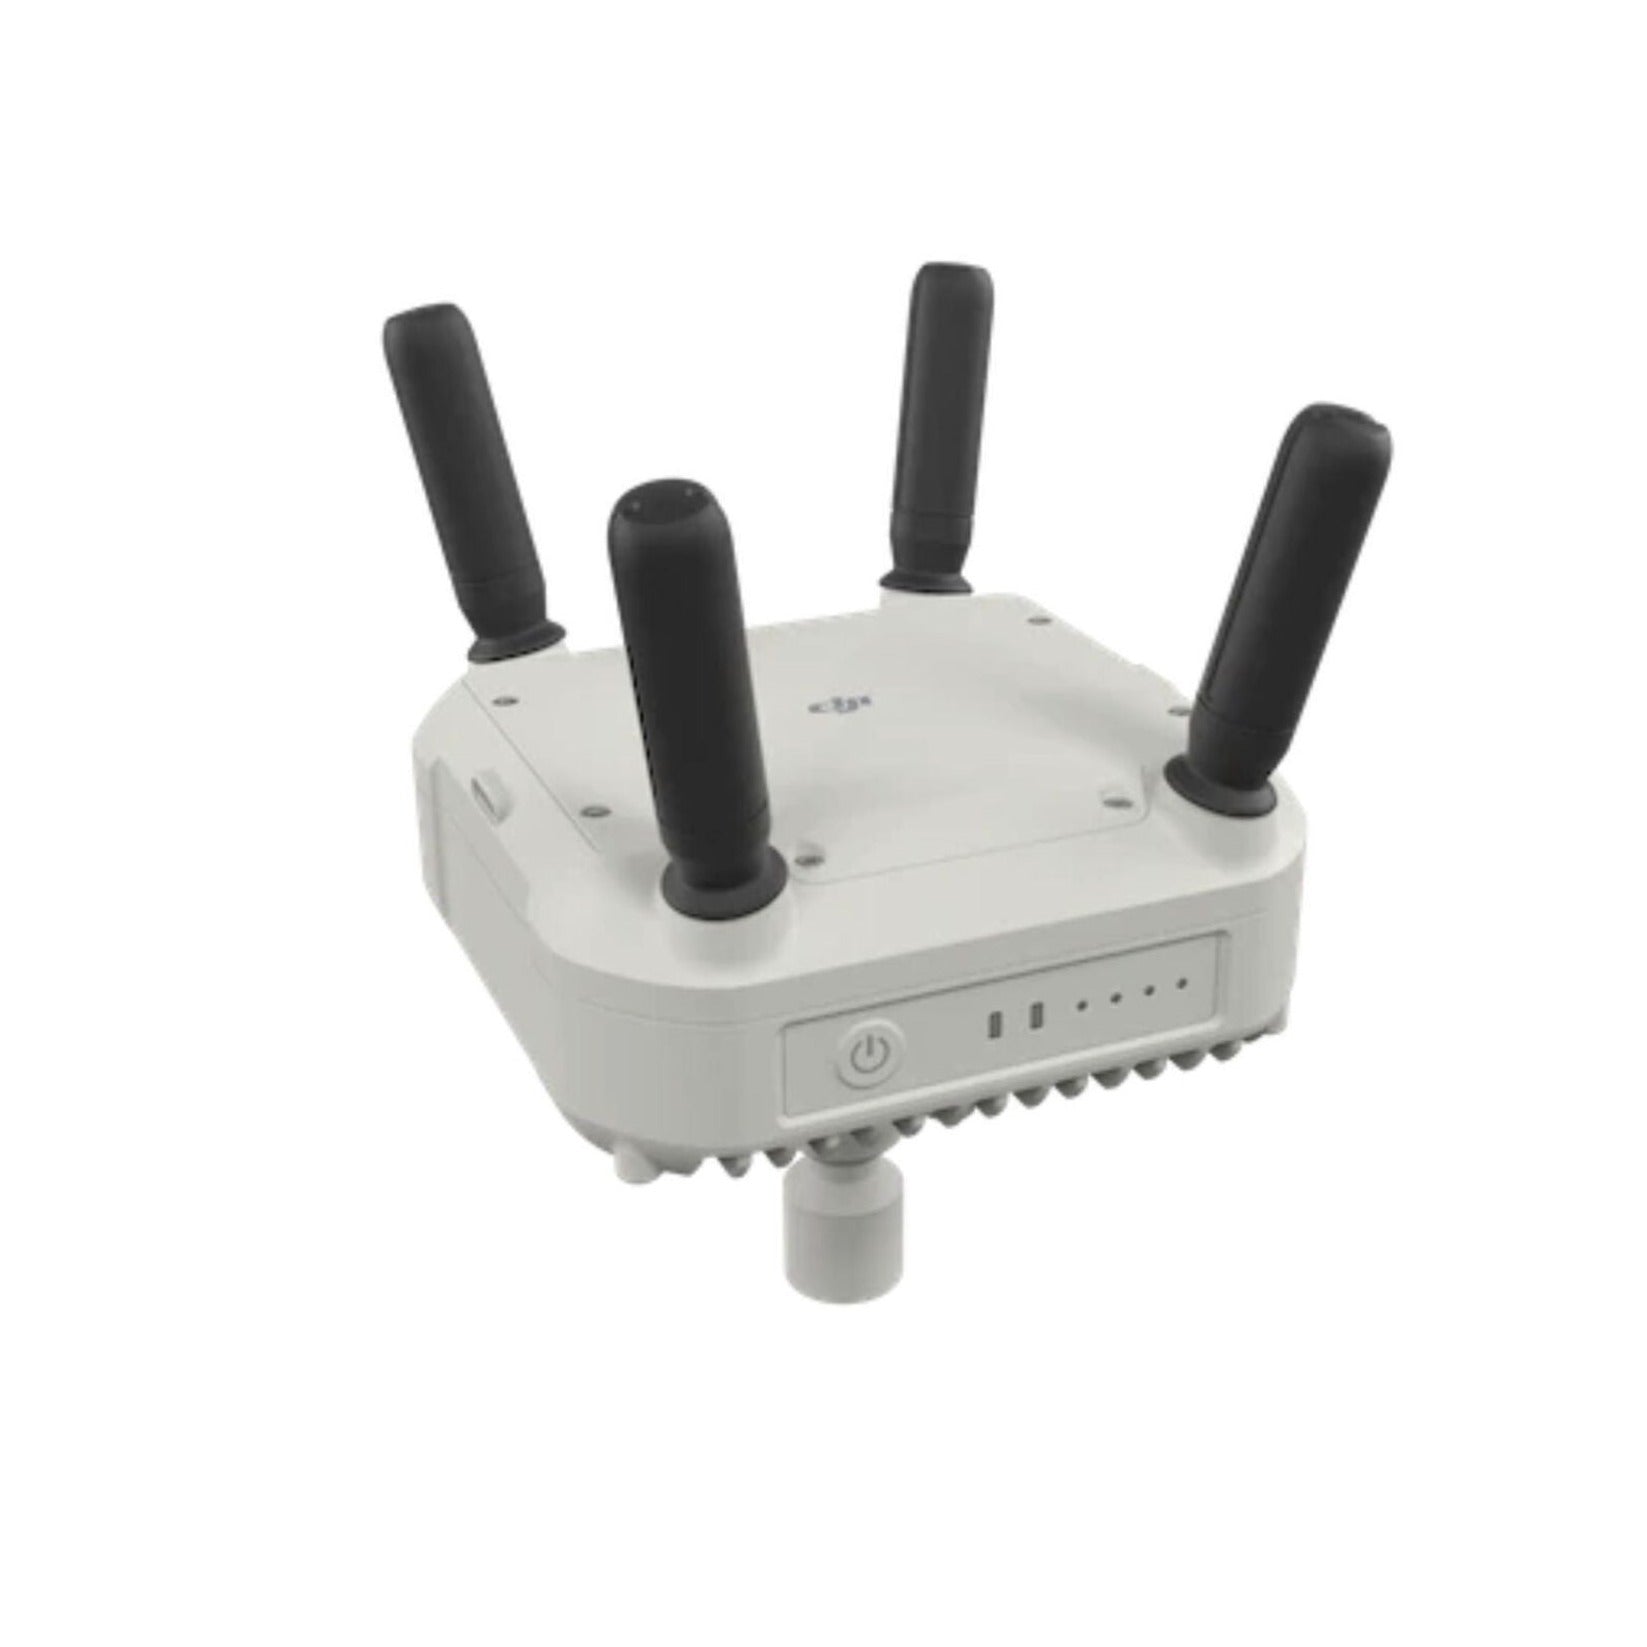 DJI Agras Agras Relay/Repeater